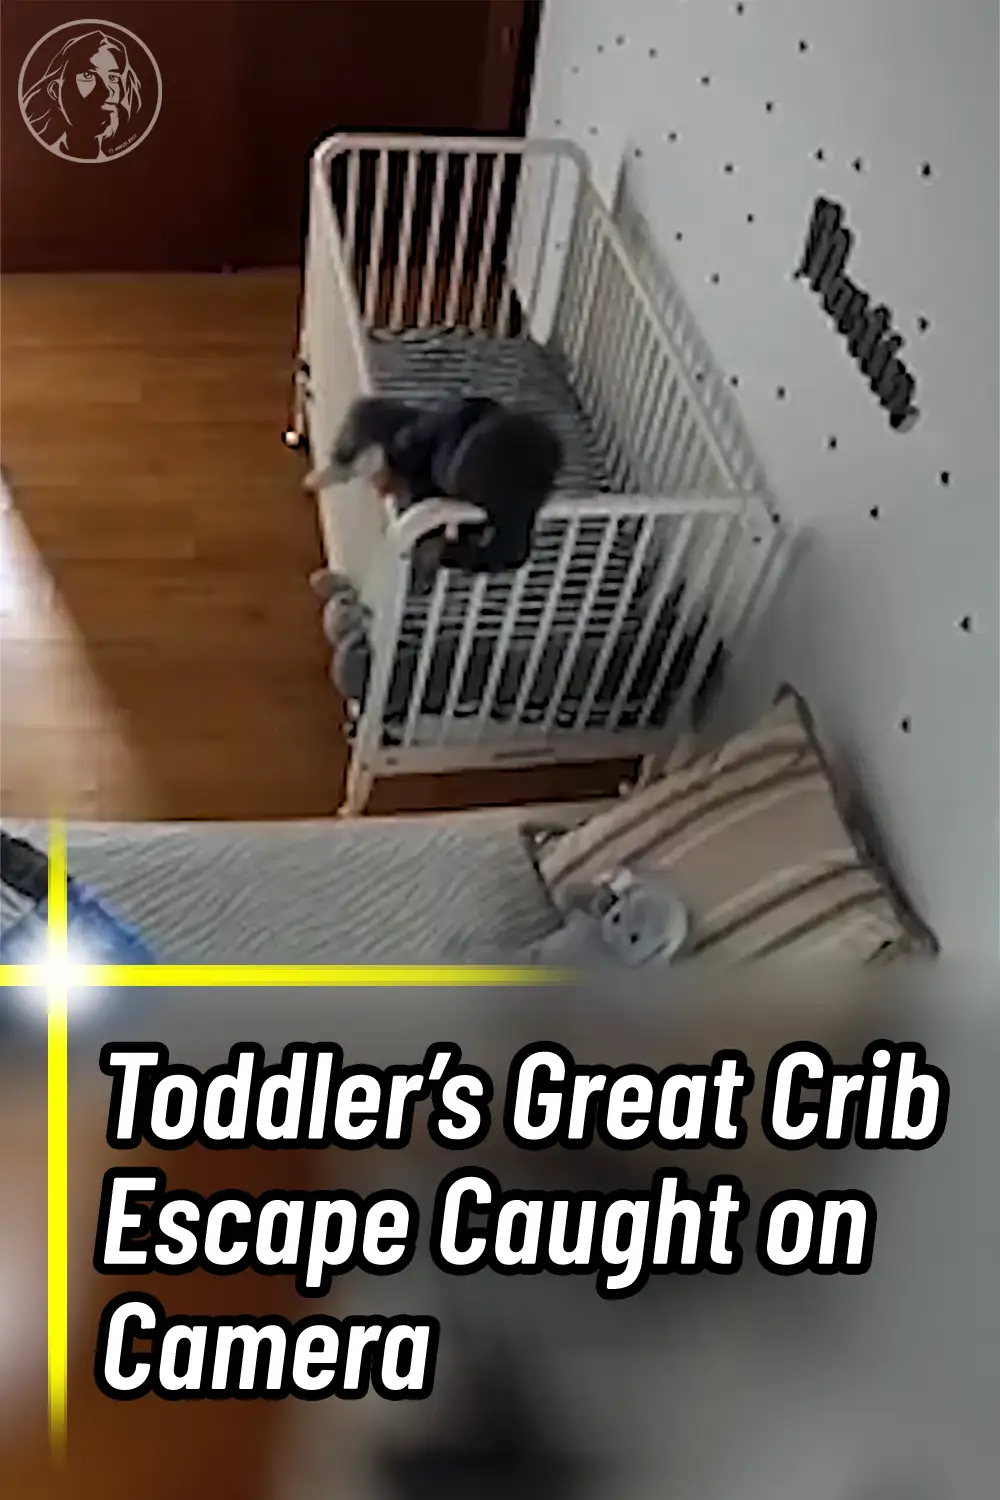 Toddler’s Great Crib Escape Caught on Camera